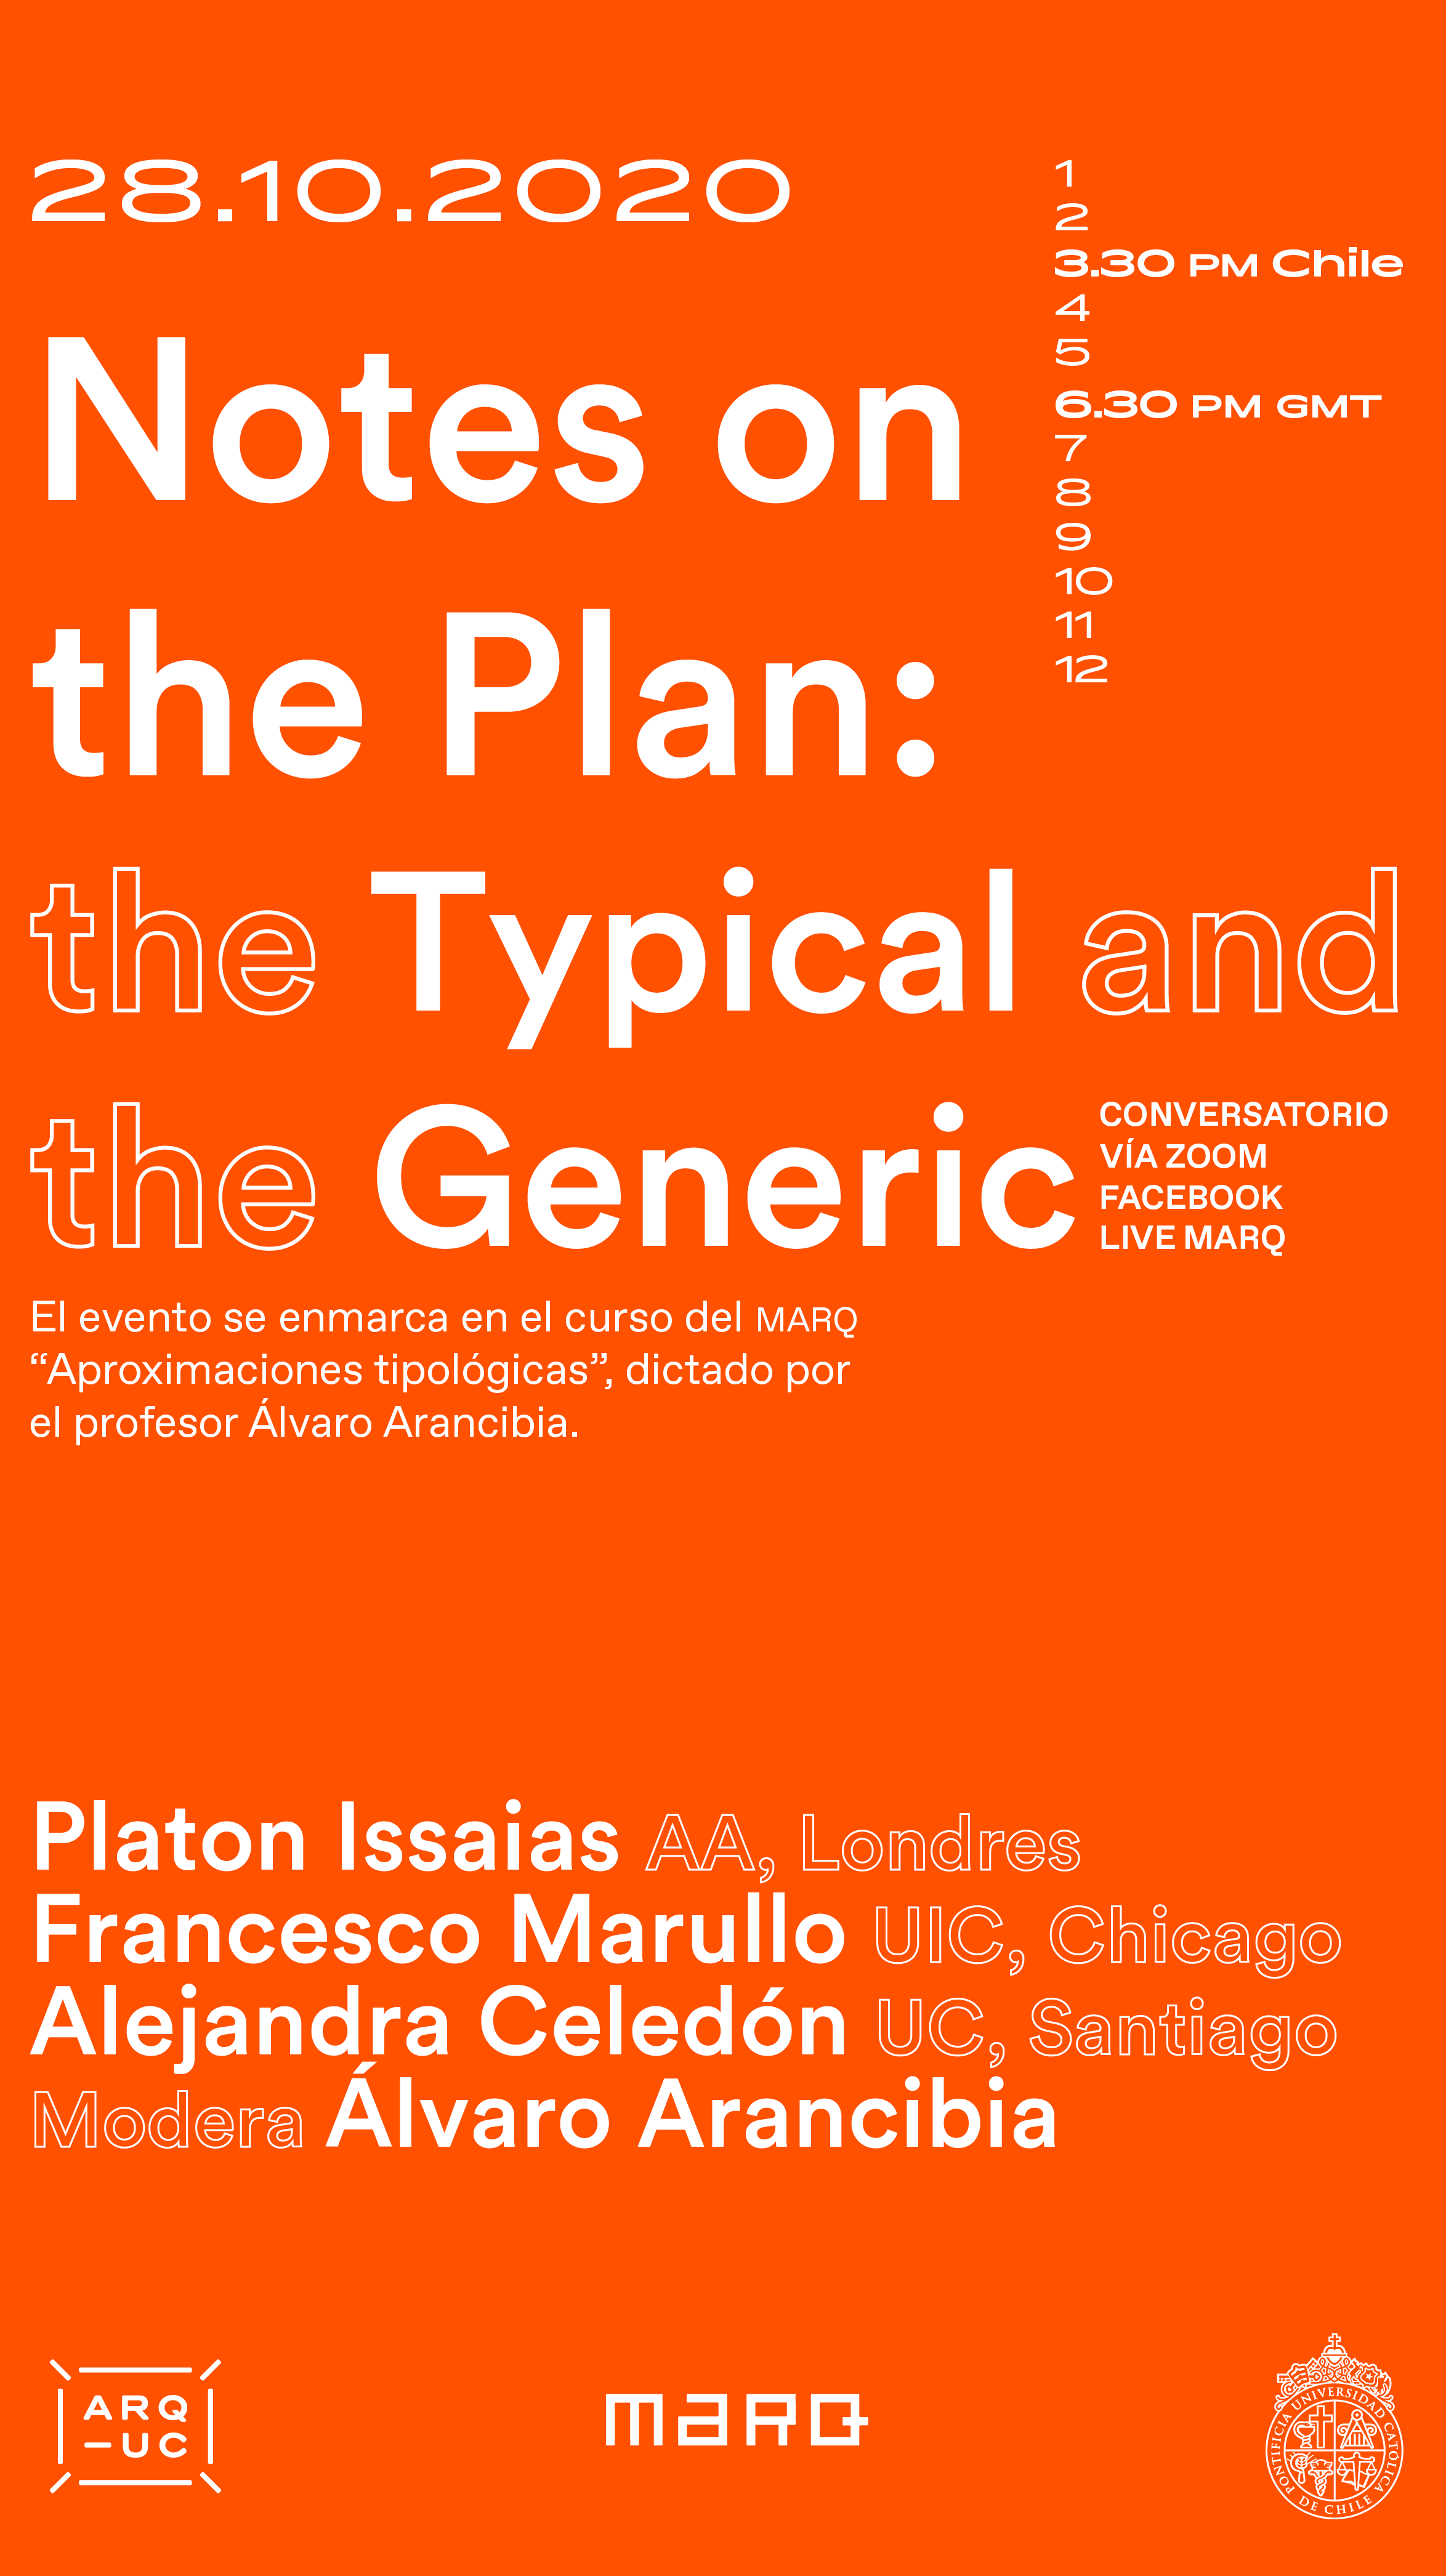 20201015_AFICHEa_conversatorio_Notes_on_the_Plan__the_Typical_and_the_Generic.png